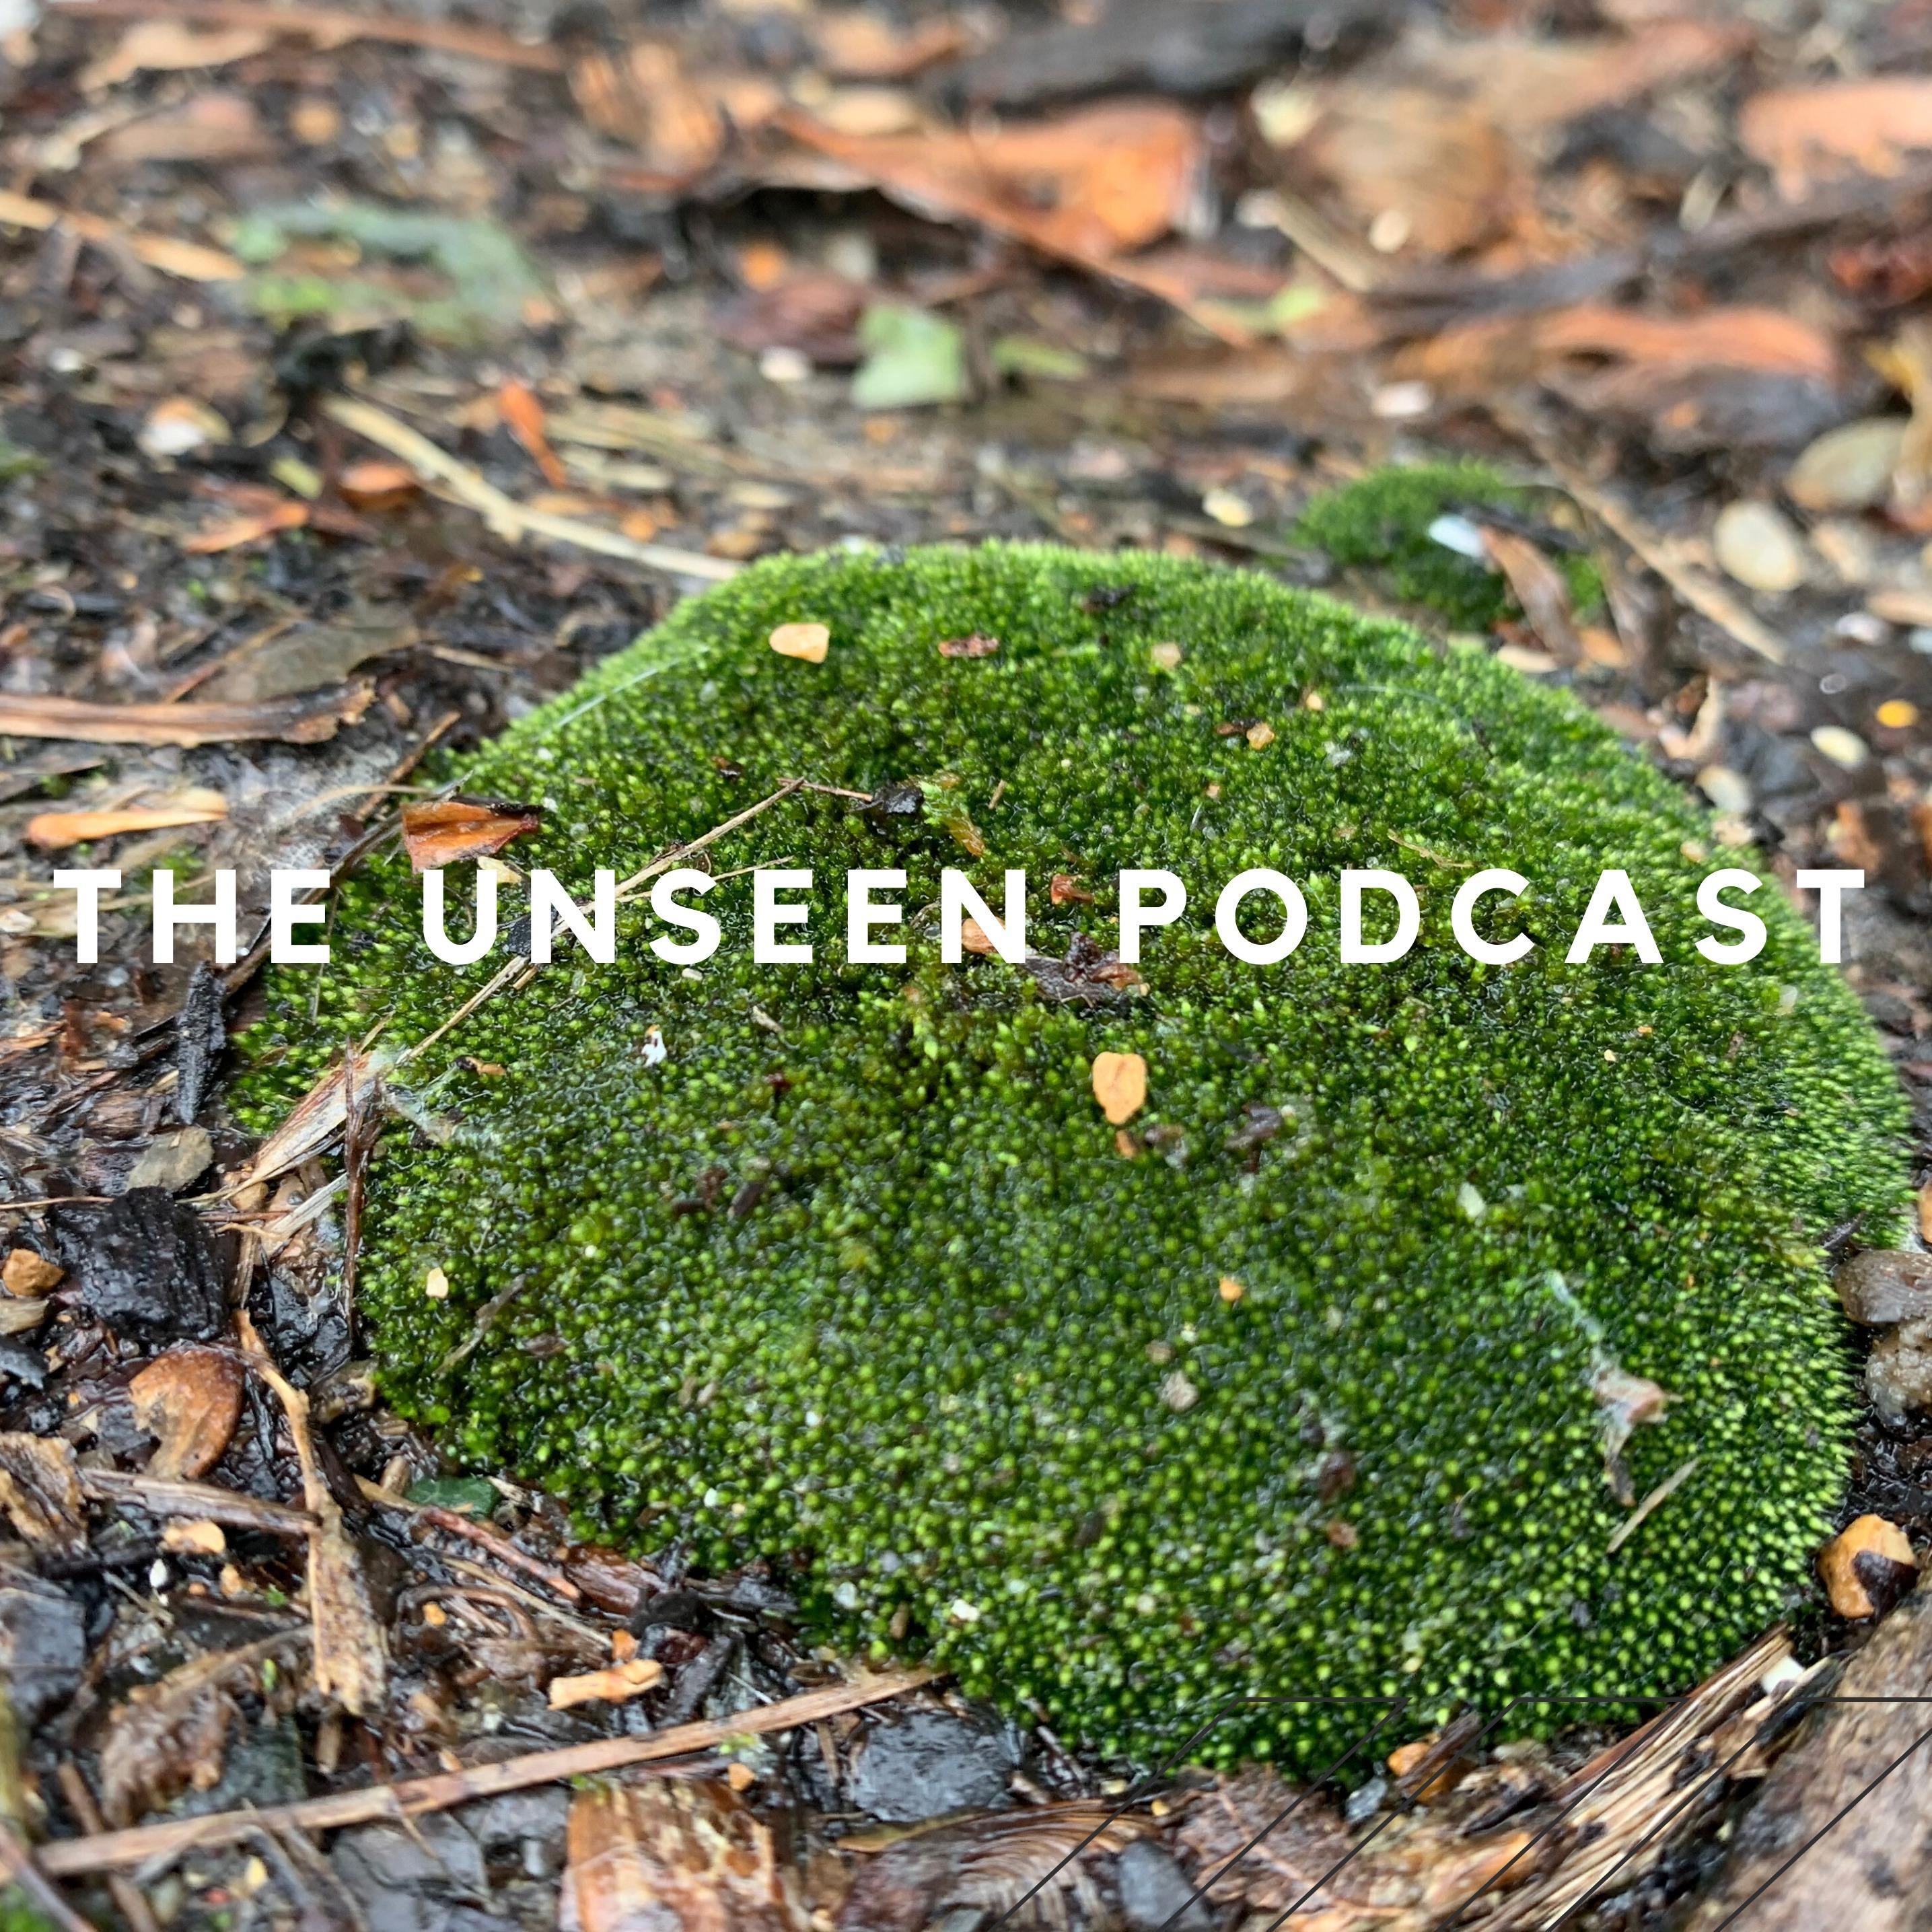 The Unseen Podcast